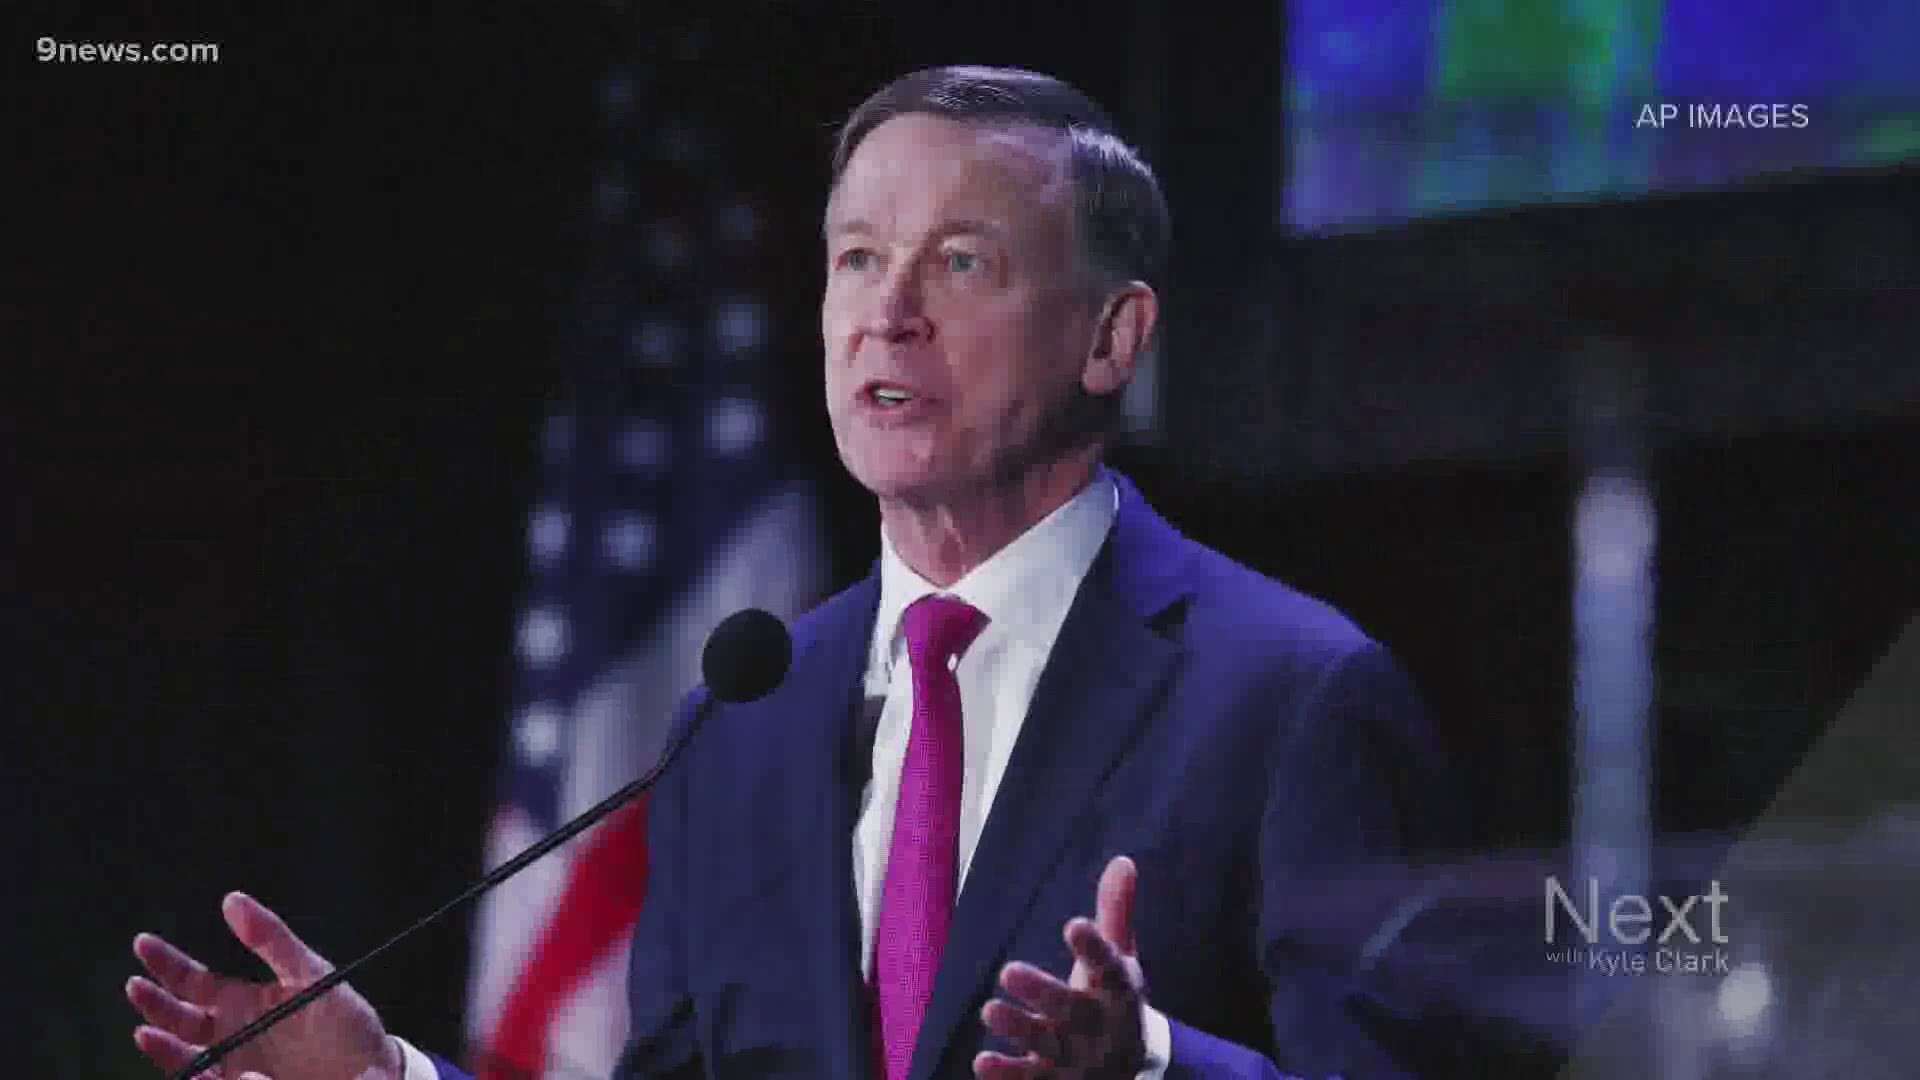 Former Gov. John Hickenlooper faces an ethics probe over whether accepting private jet travel from wealthy supporters constituted illegal gifts.